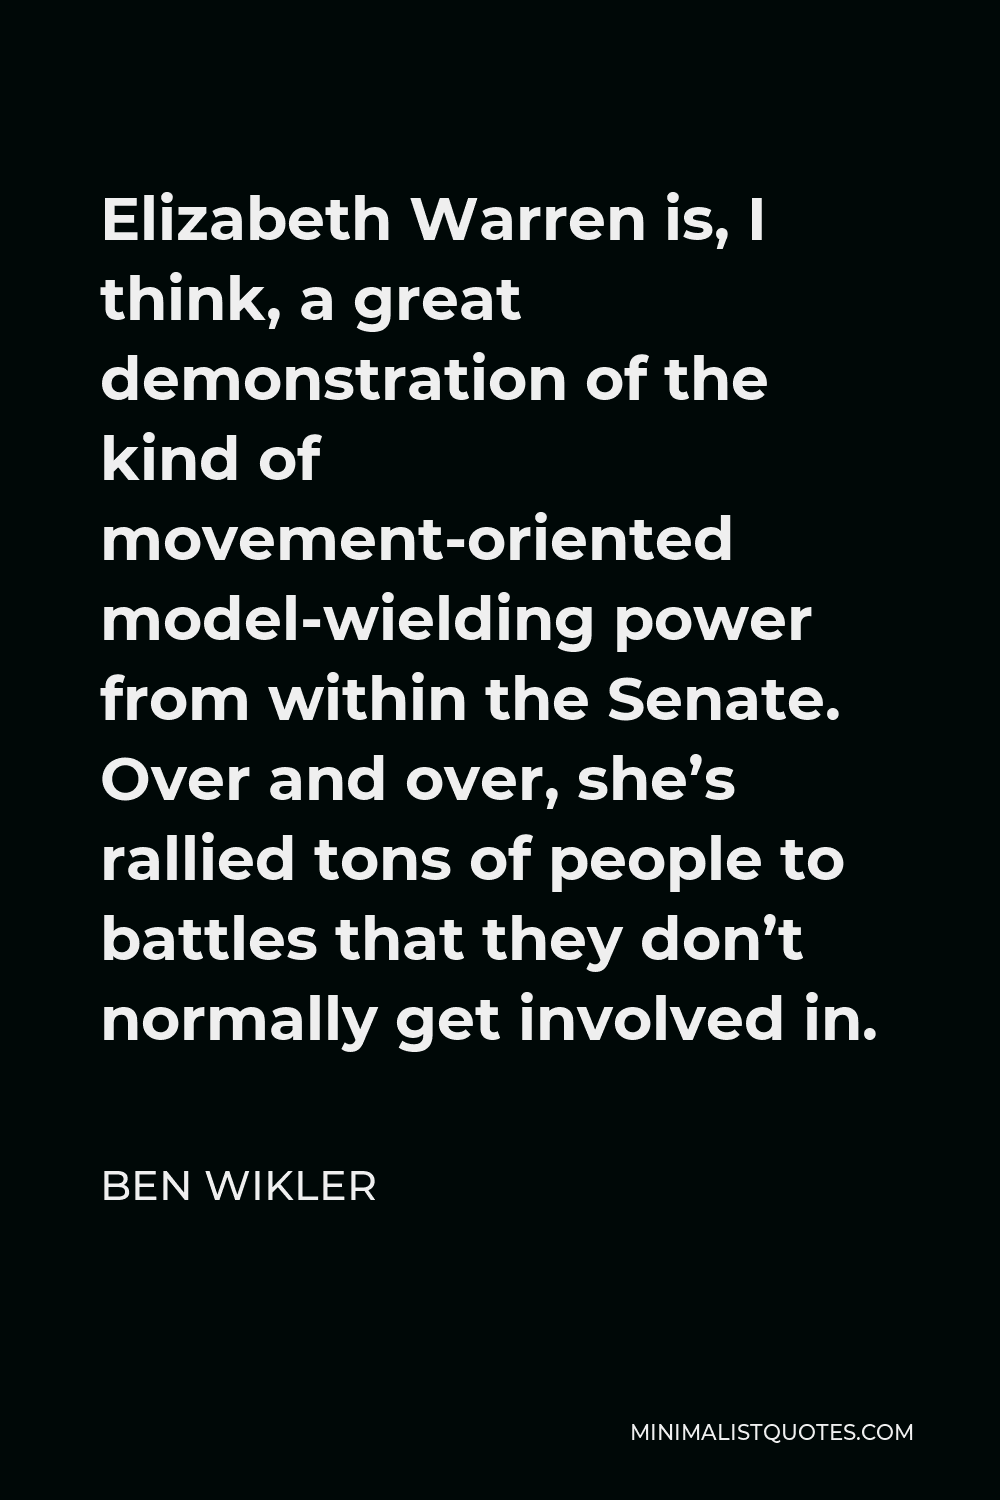 Ben Wikler Quote - Elizabeth Warren is, I think, a great demonstration of the kind of movement-oriented model-wielding power from within the Senate. Over and over, she’s rallied tons of people to battles that they don’t normally get involved in.